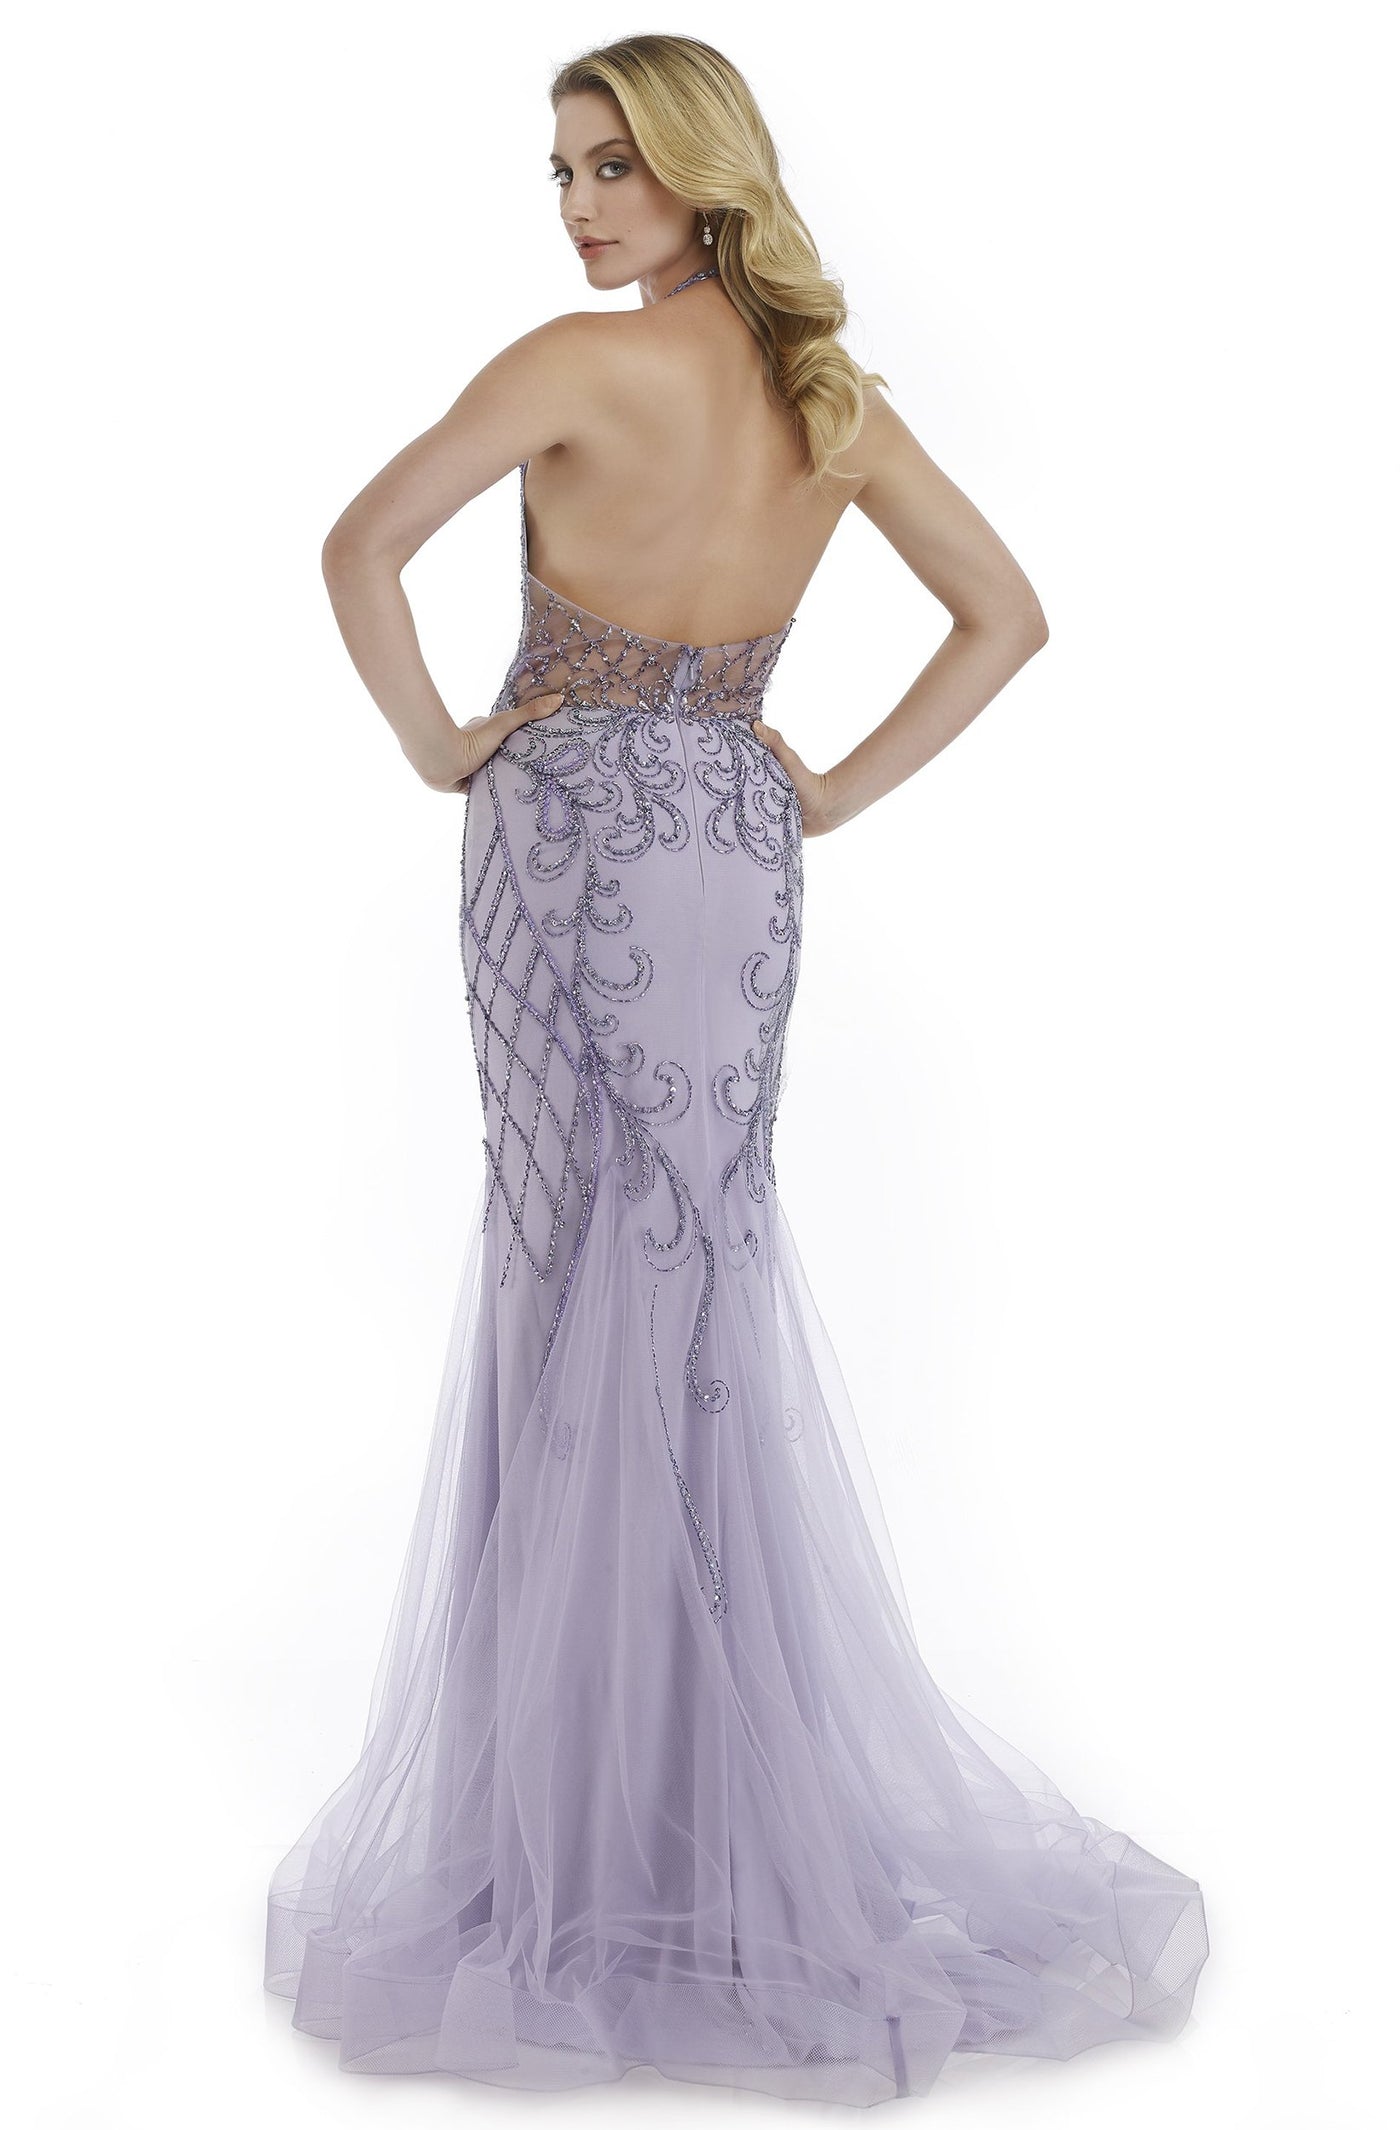 Morrell Maxie - 16003 Illusion Halter Neck Beaded Mermaid Gown in Purple